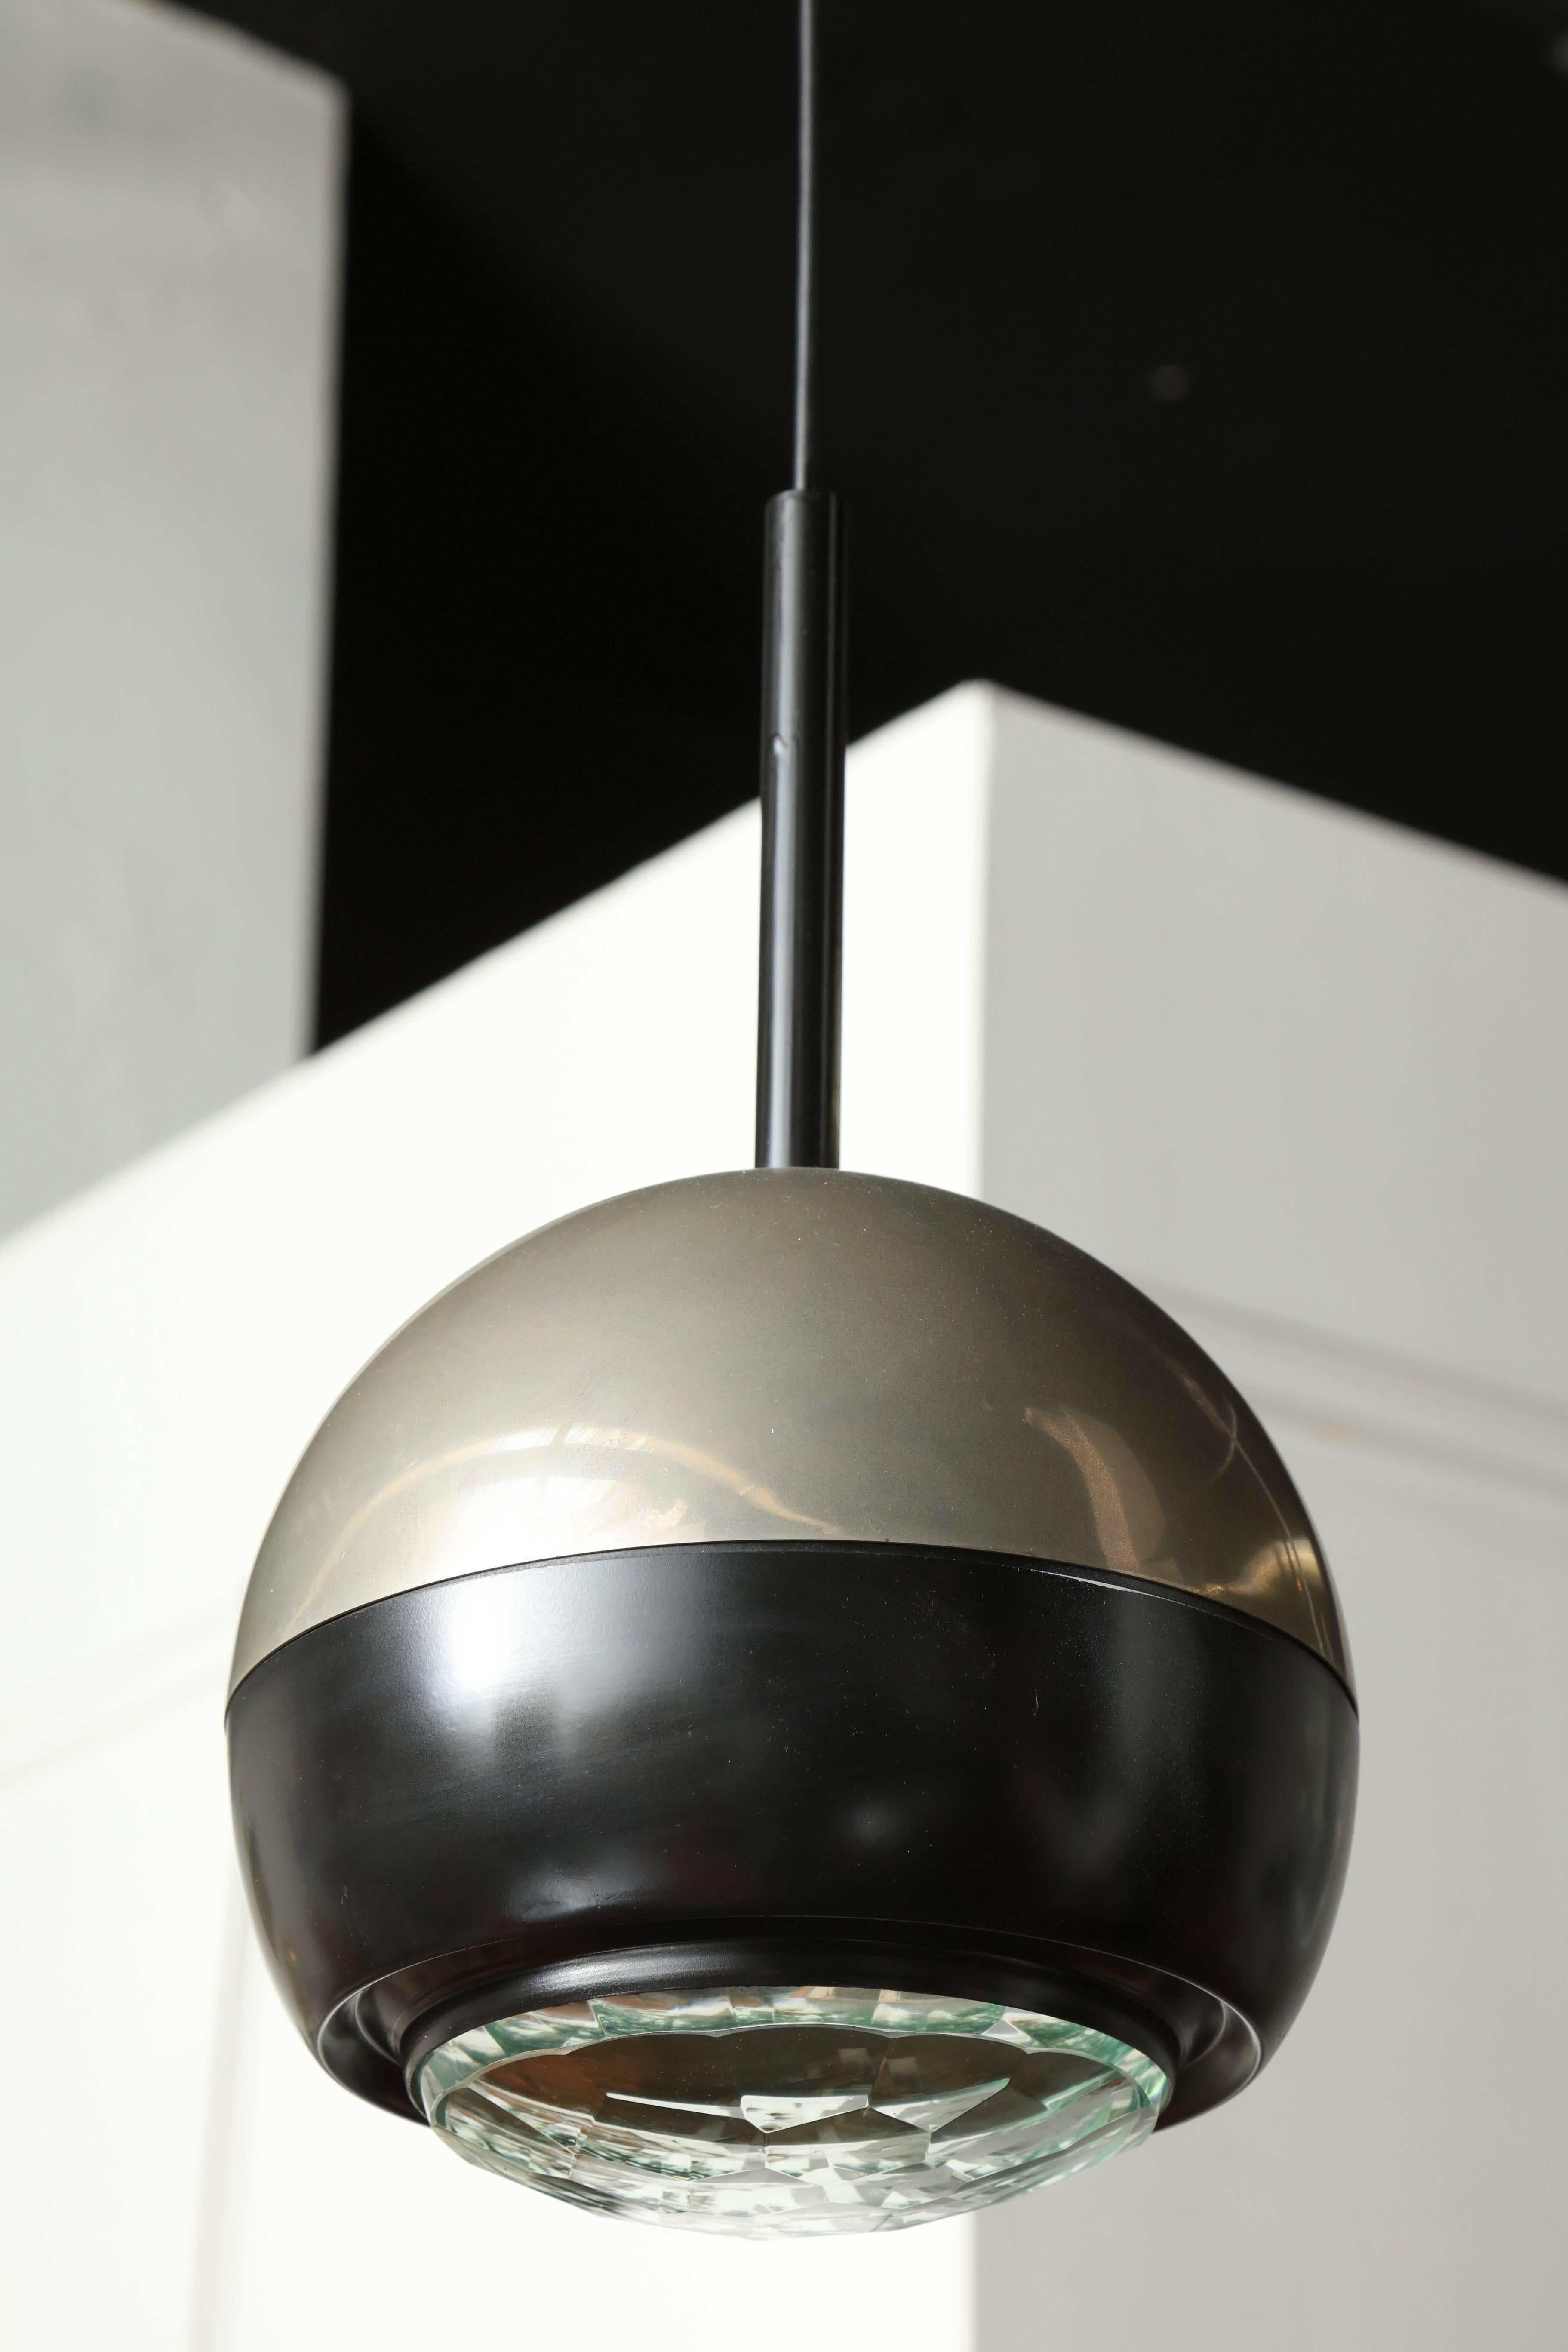 Exciting modernist pendant light made in Milan 1960 by Stilnovo. Nickel finish with a border in black lacquer and a cut-glass shade, adjustable wire can be made longer or shorter, great form, takes one incandescent bulb.
 